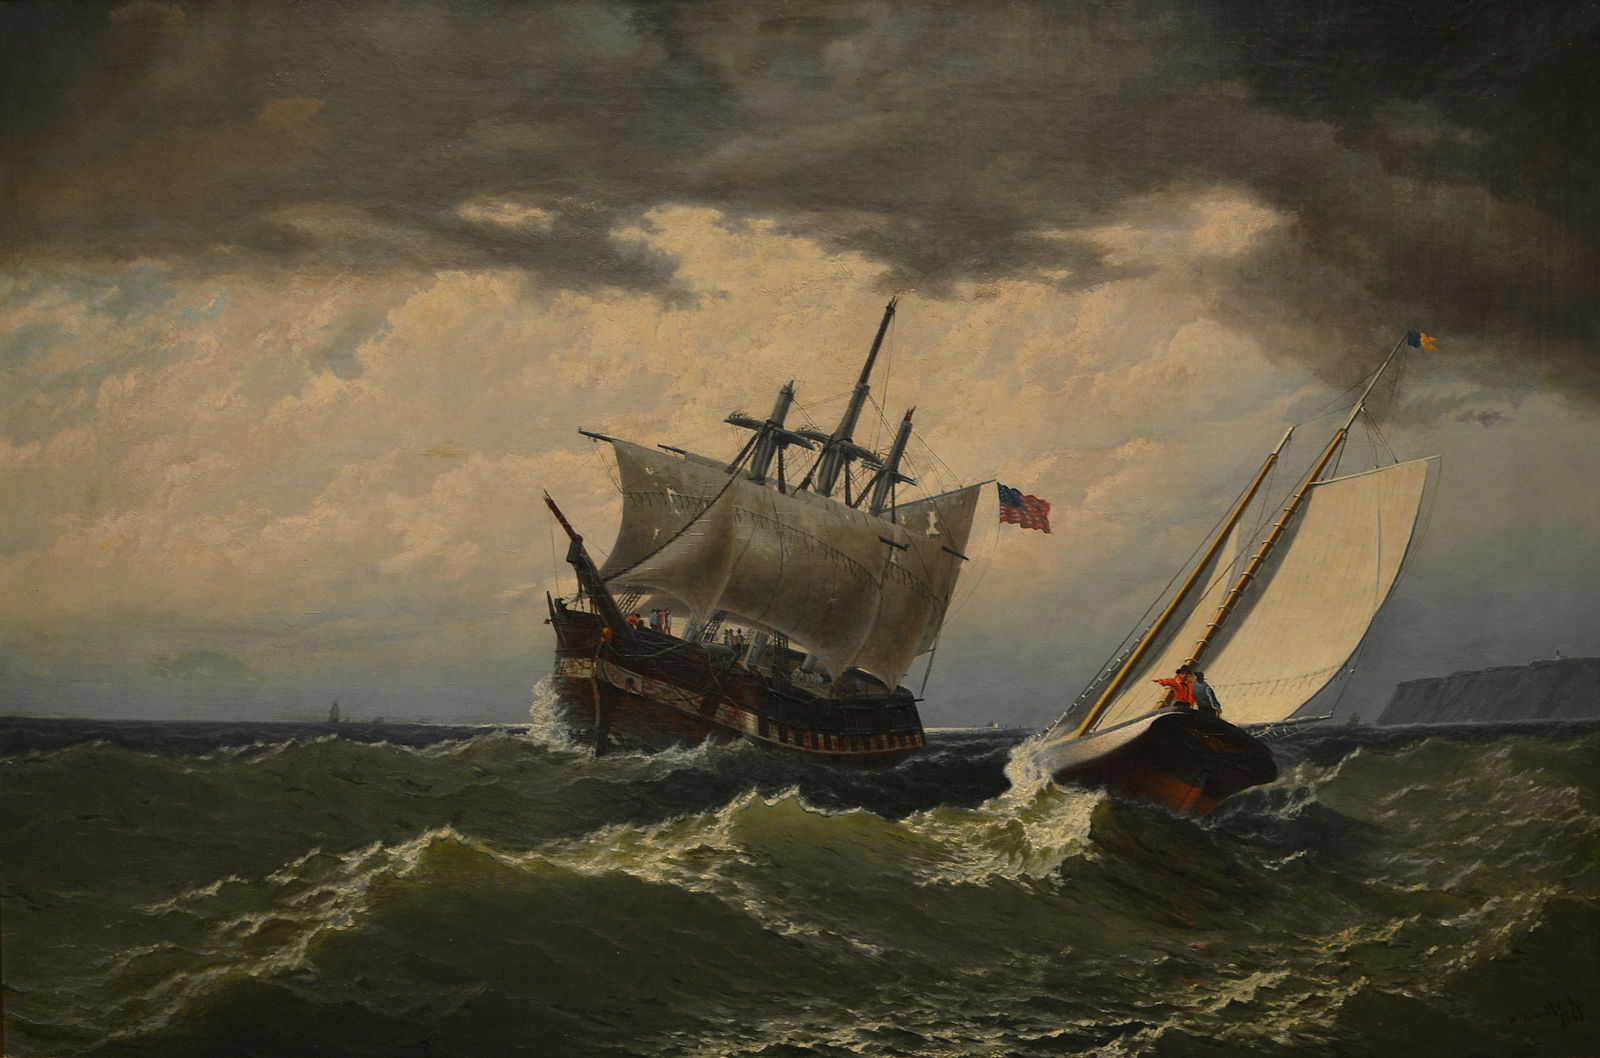 After the Storm by William Bradford: Two sailing ships in a stormy sea